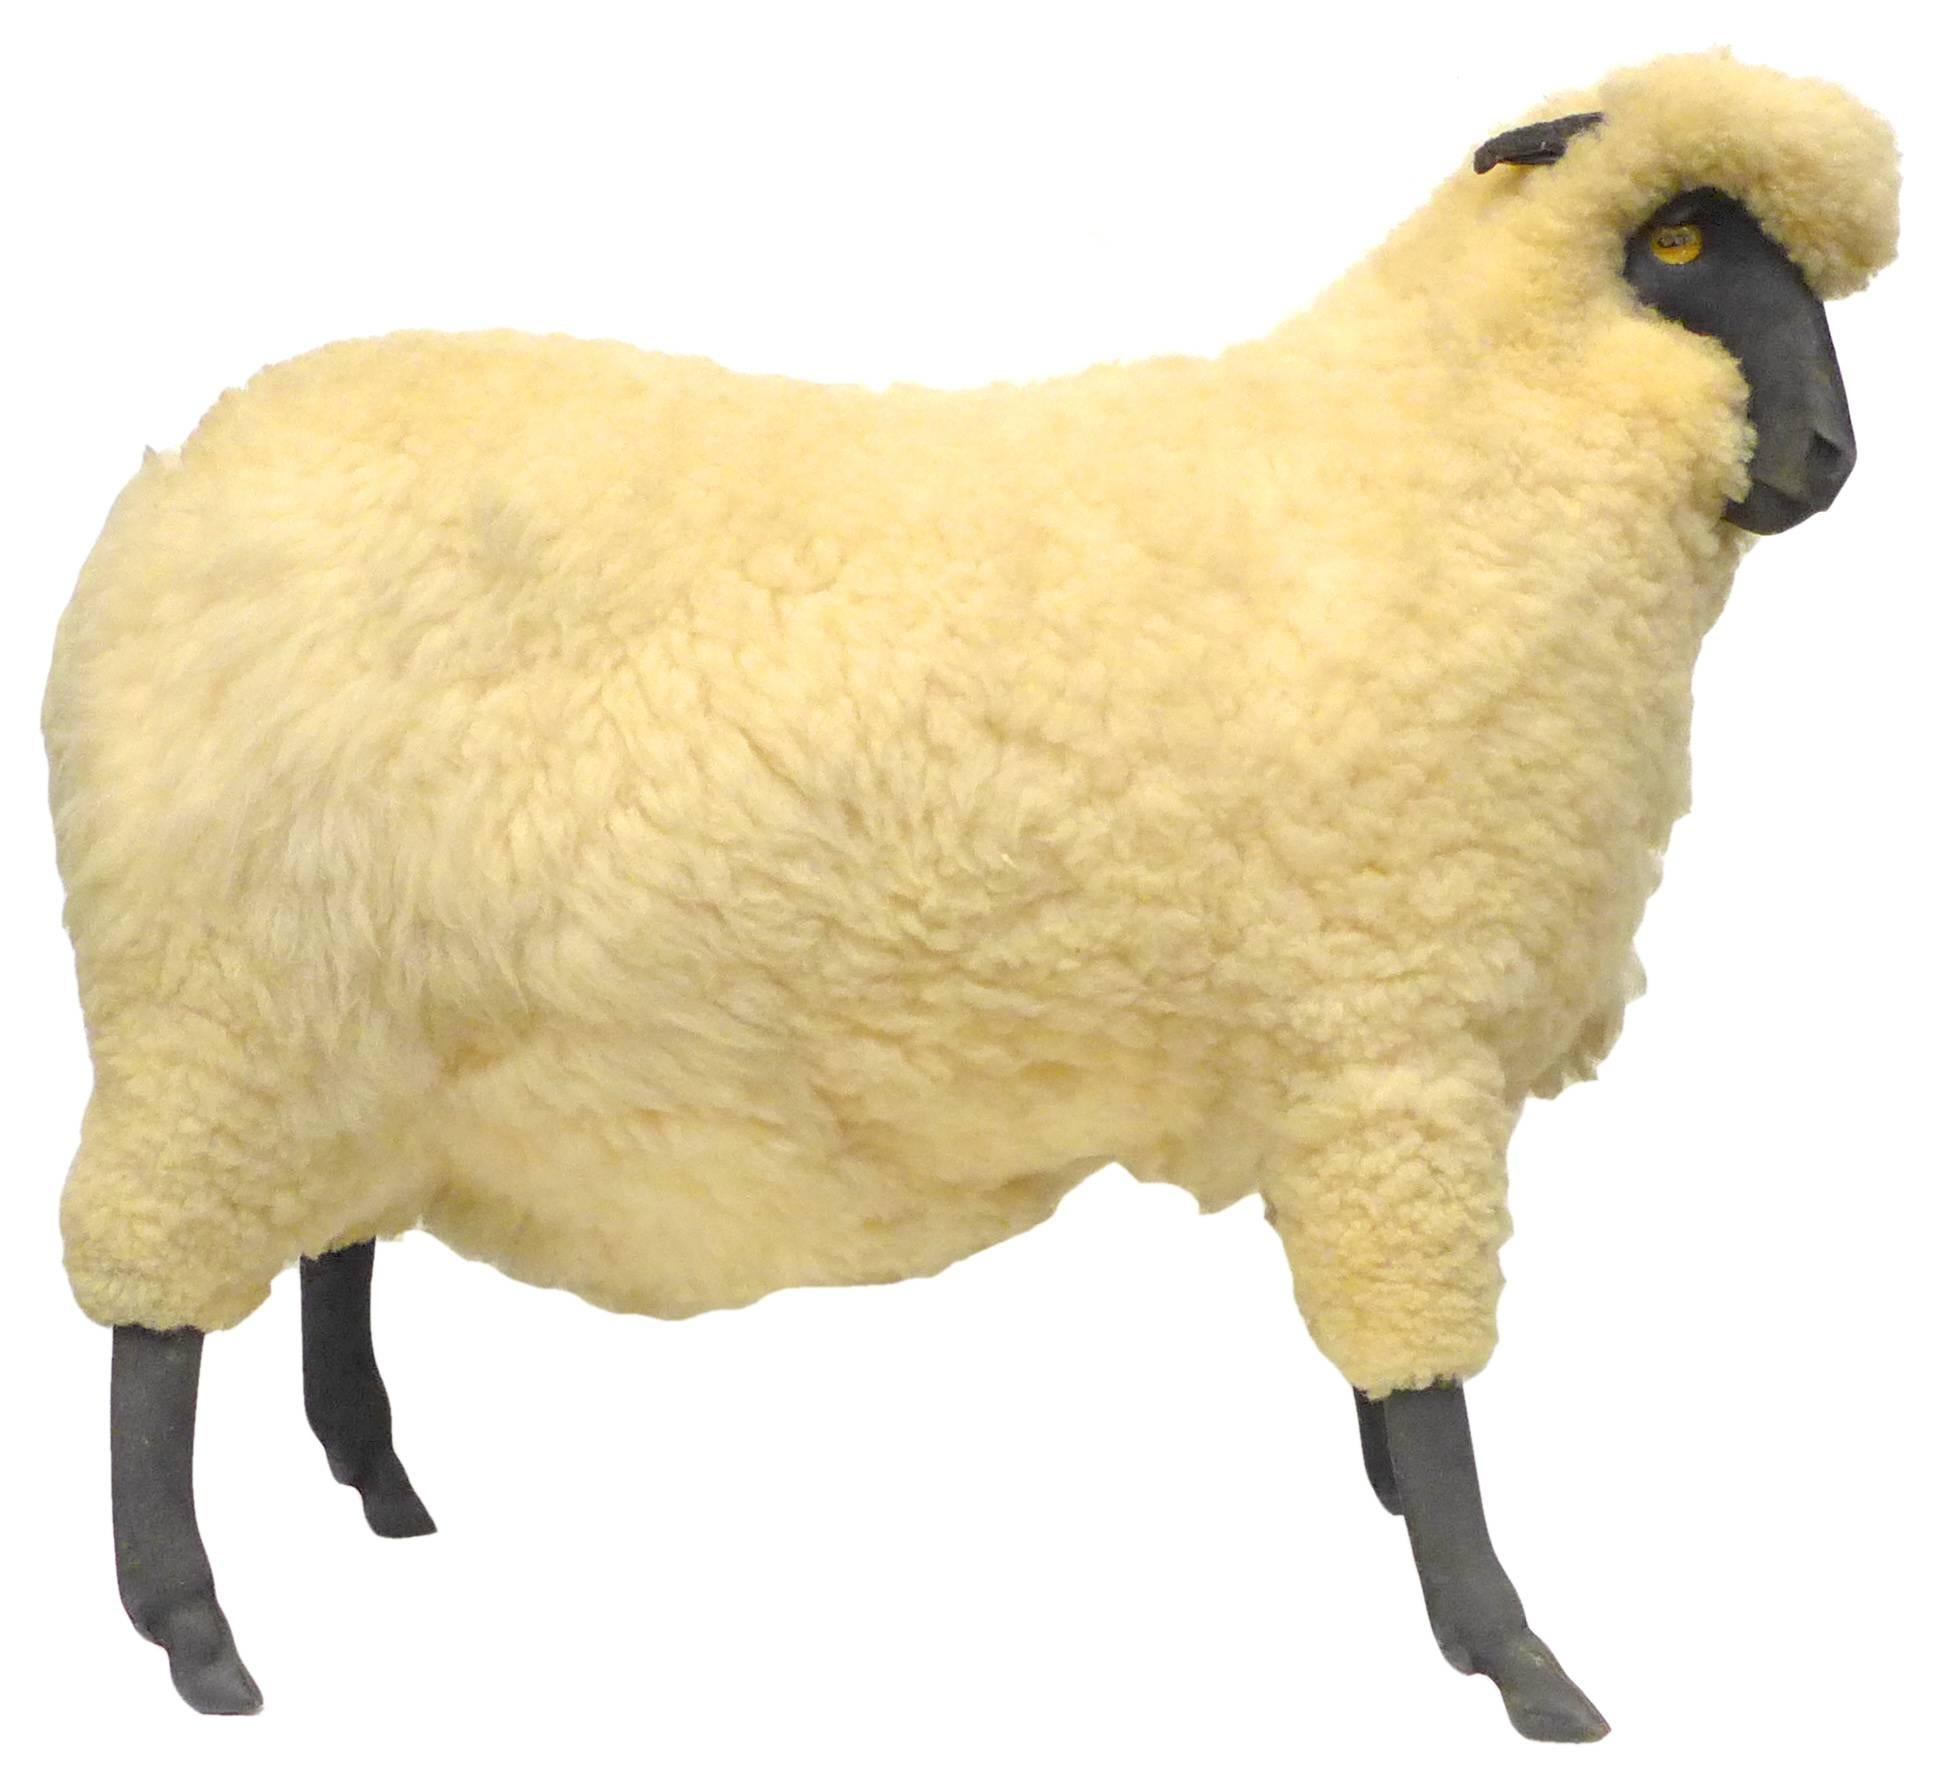 American Vintage Wool and Resin Sheep in the Style of Lalanne